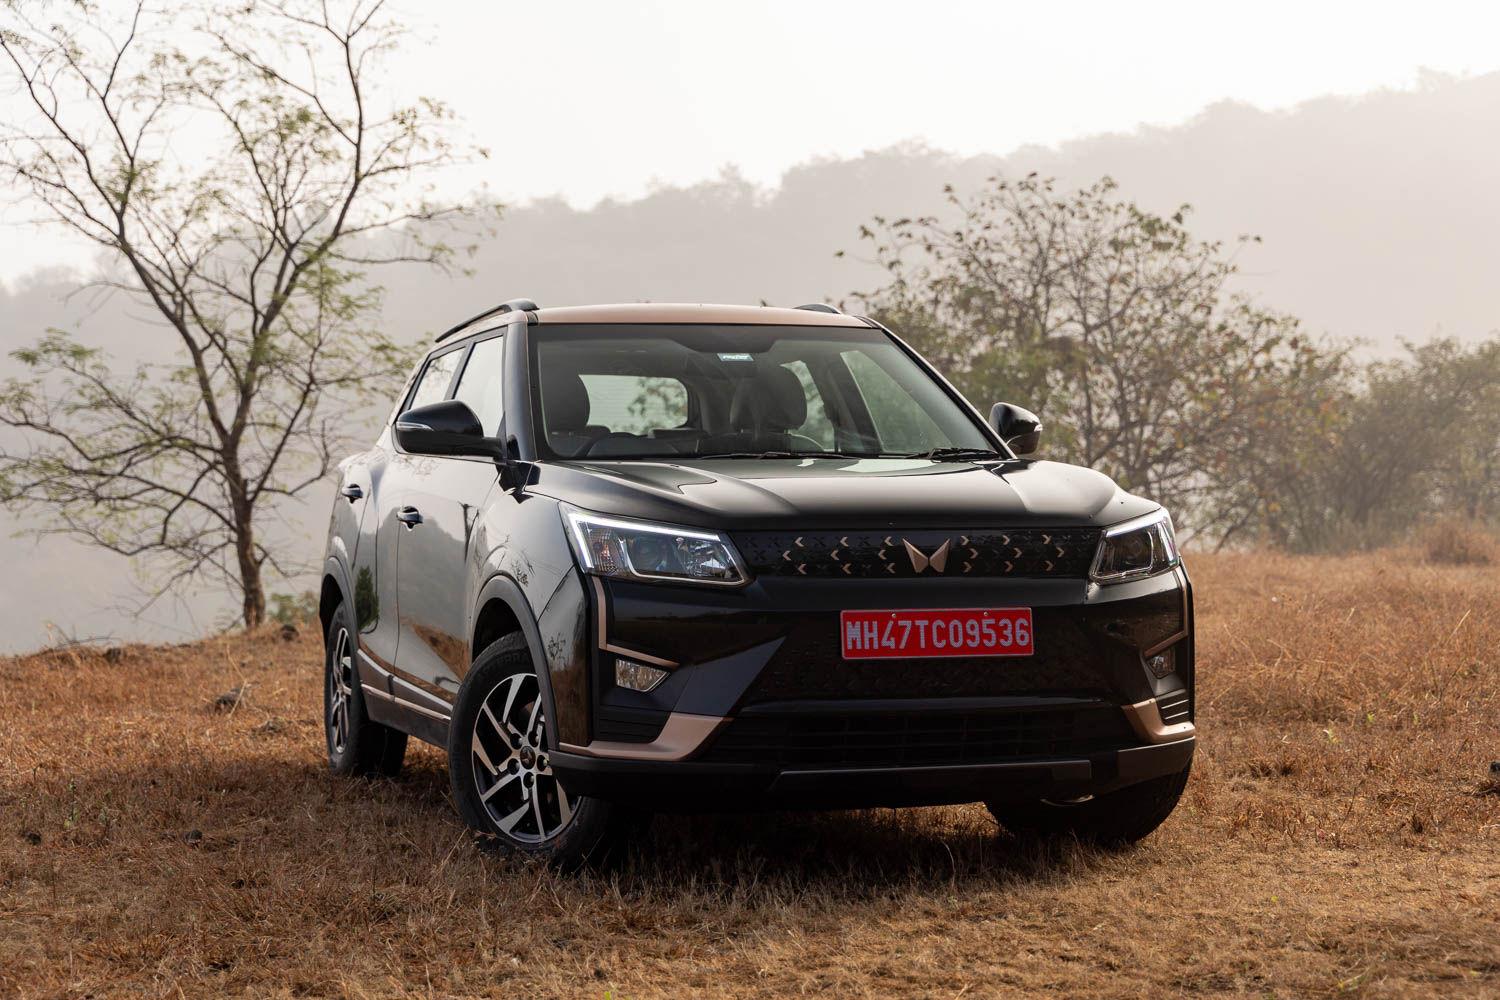 New Mahindra XUV400 EL Pro Variant Explained In 15 Pictures